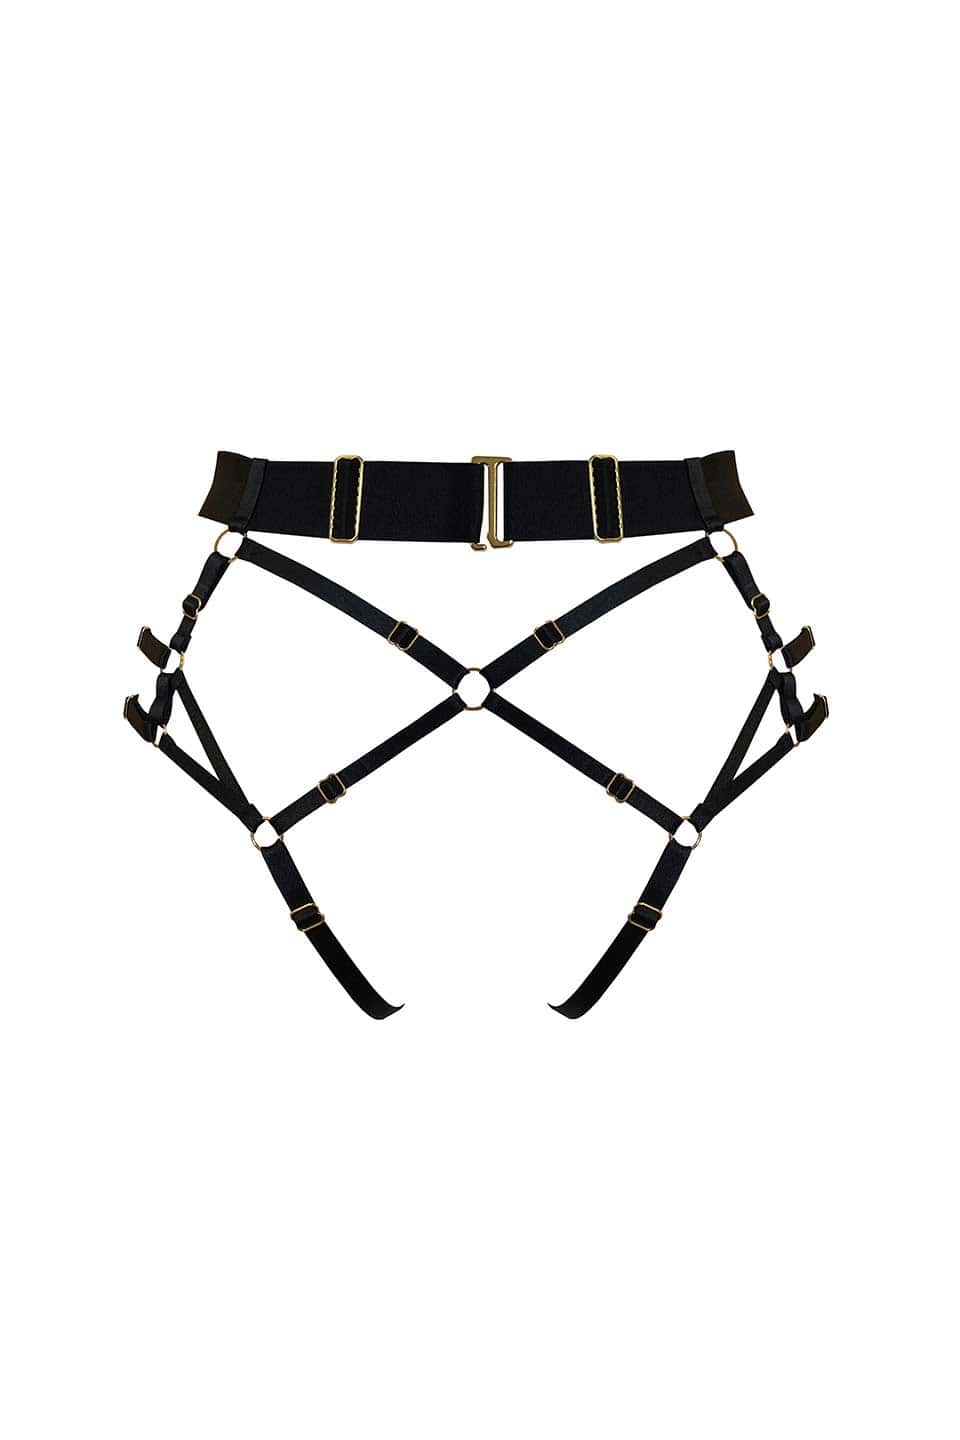 Atelier bordelle kora multi style harness brief with thong black back